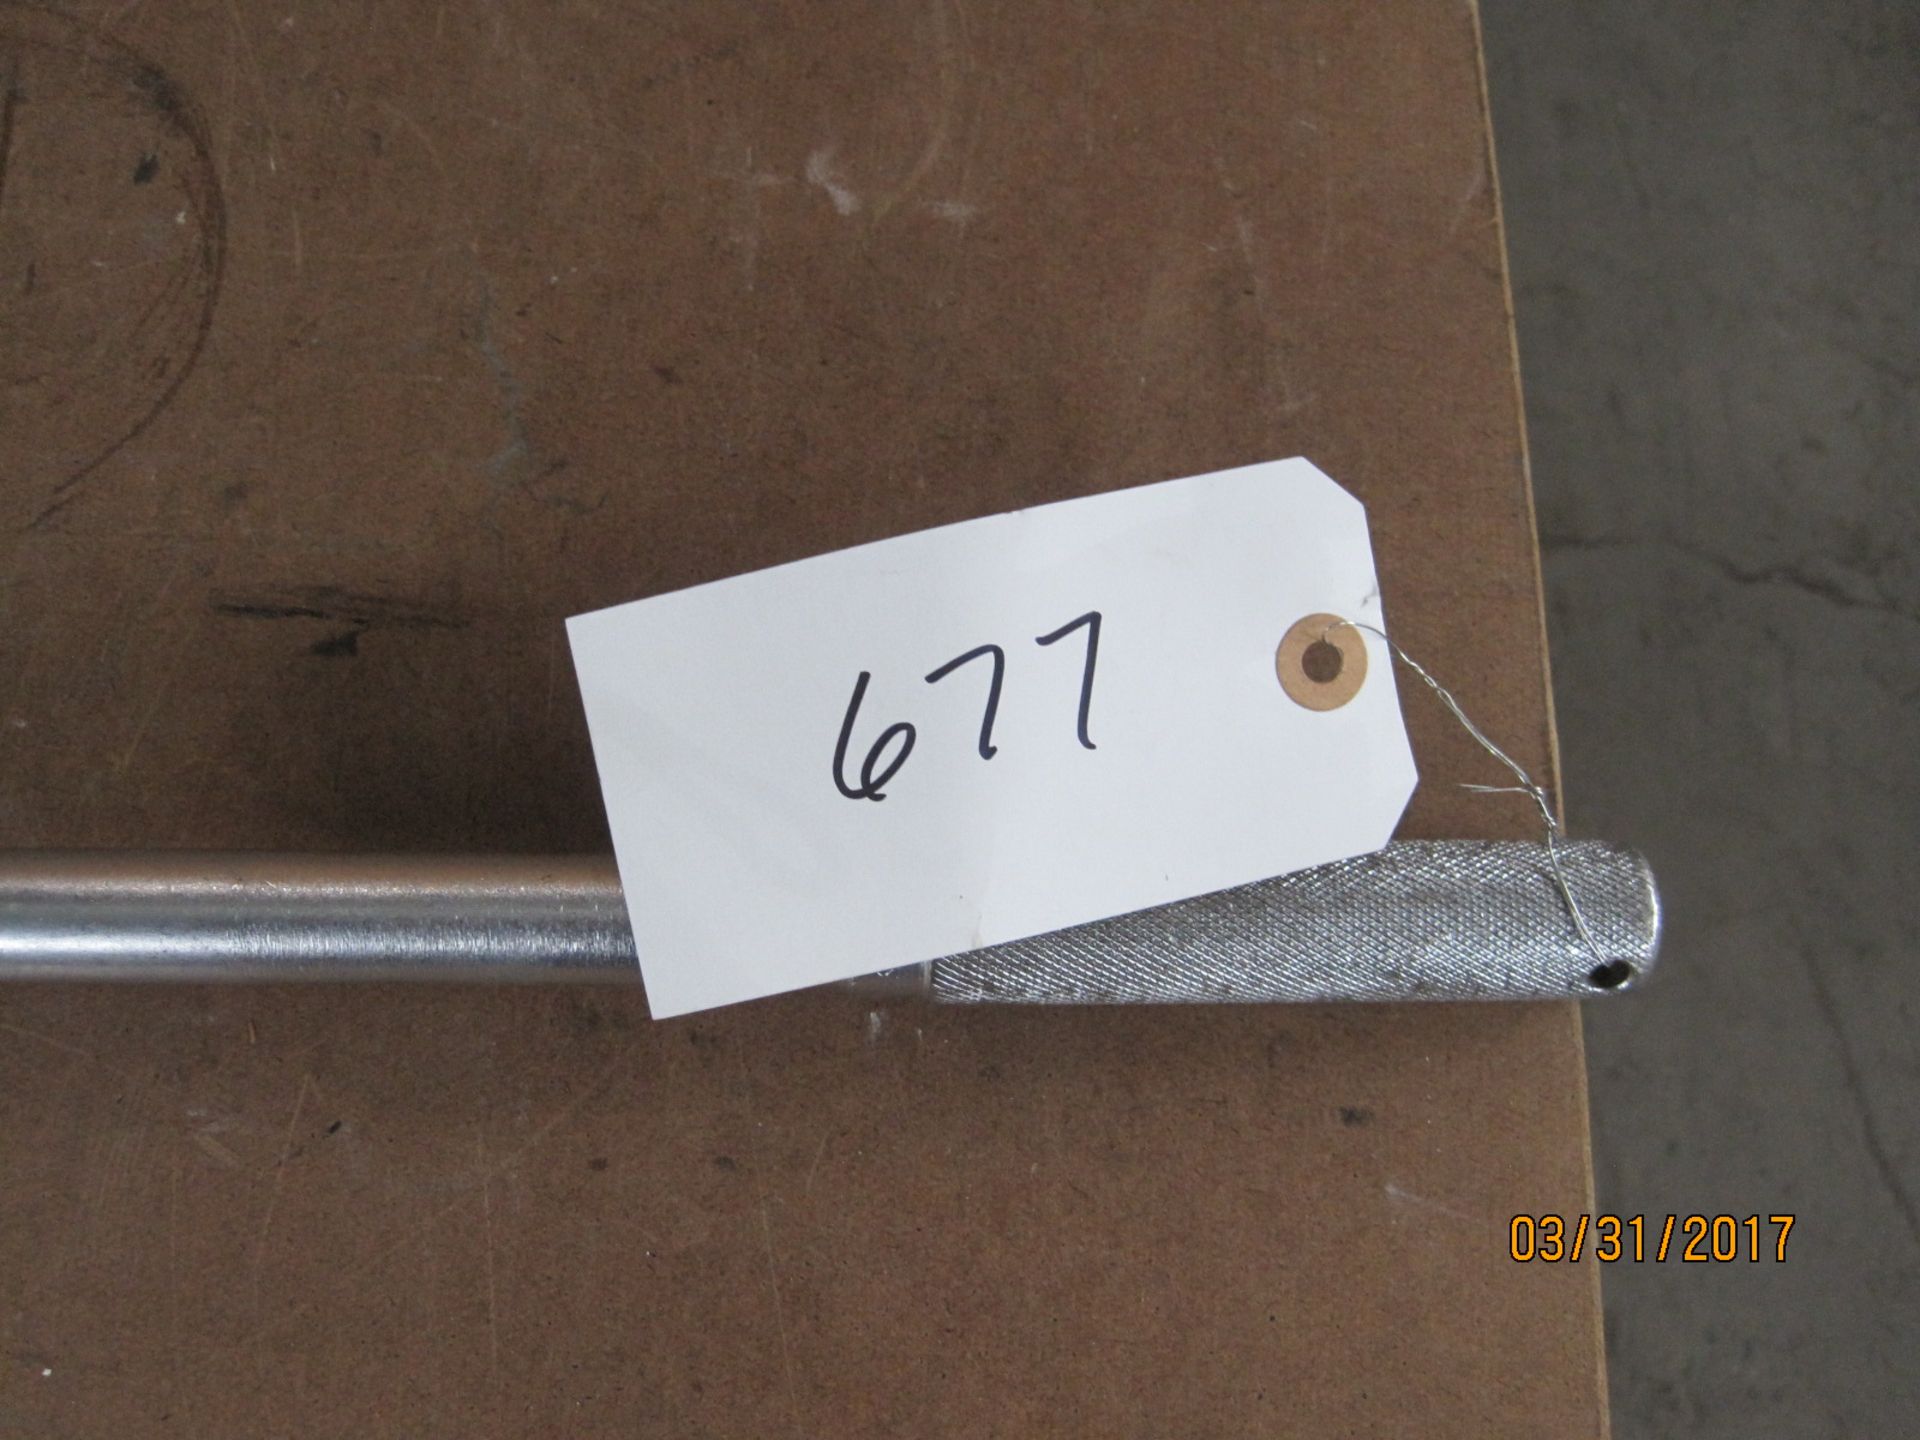 3/4" Snap-On L72T ratchet wrench